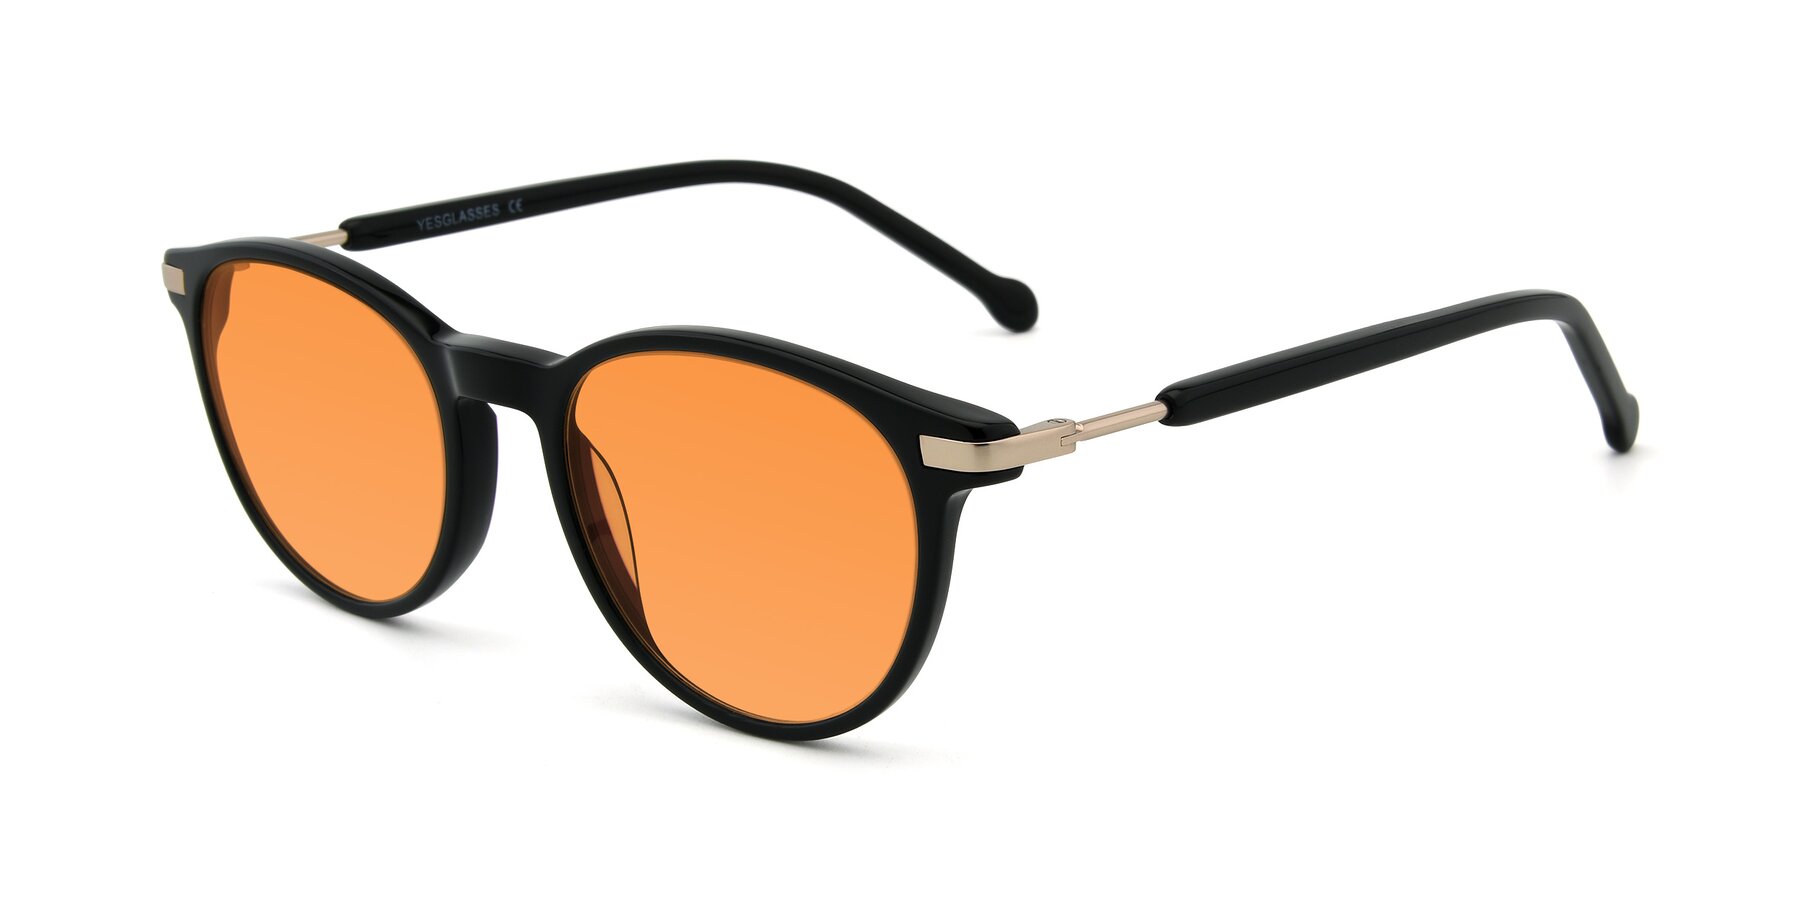 Angle of 17429 in Black with Orange Tinted Lenses